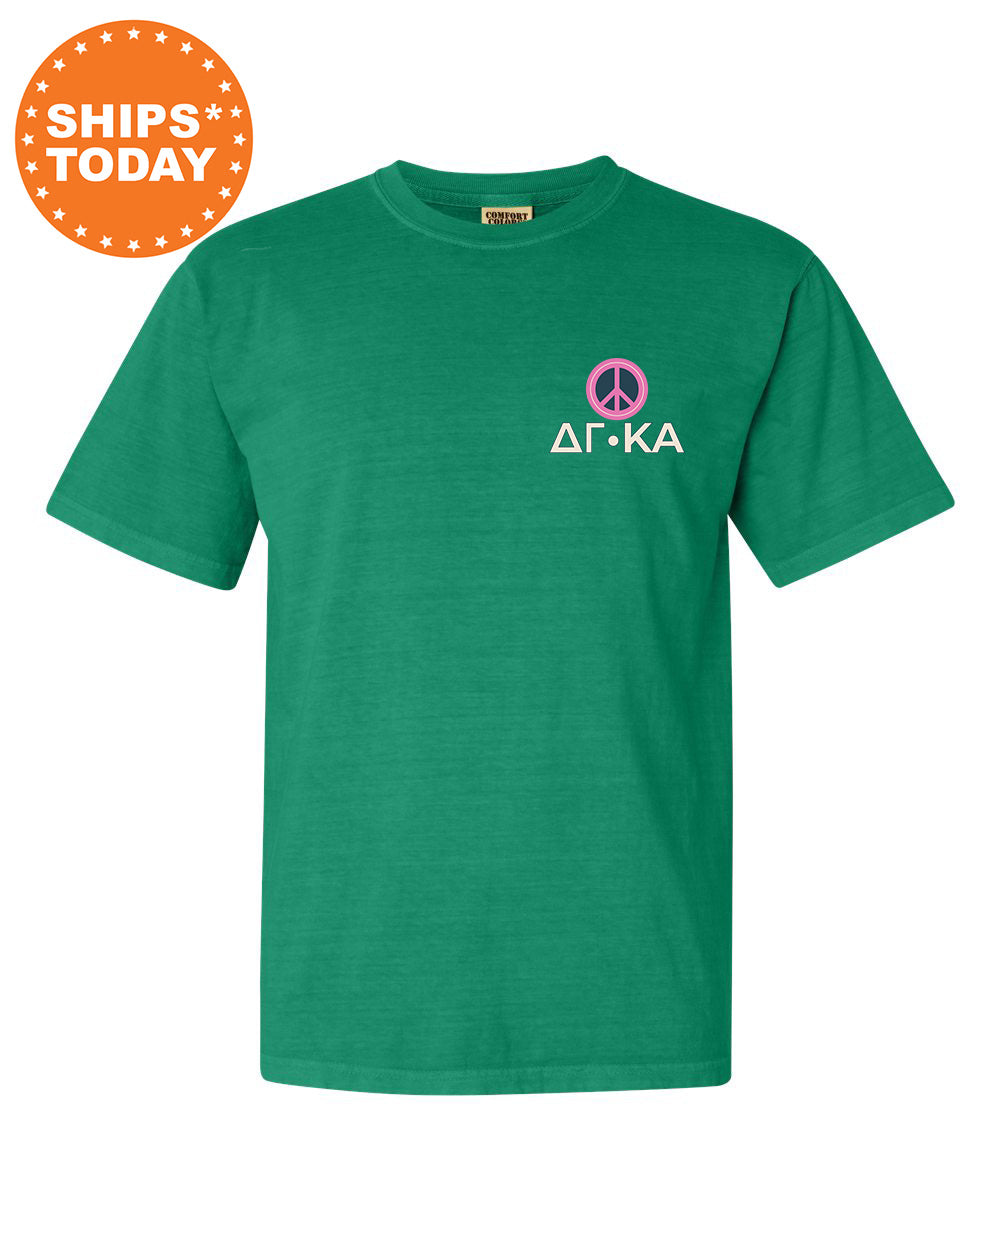 a green t - shirt with a peace sign on it